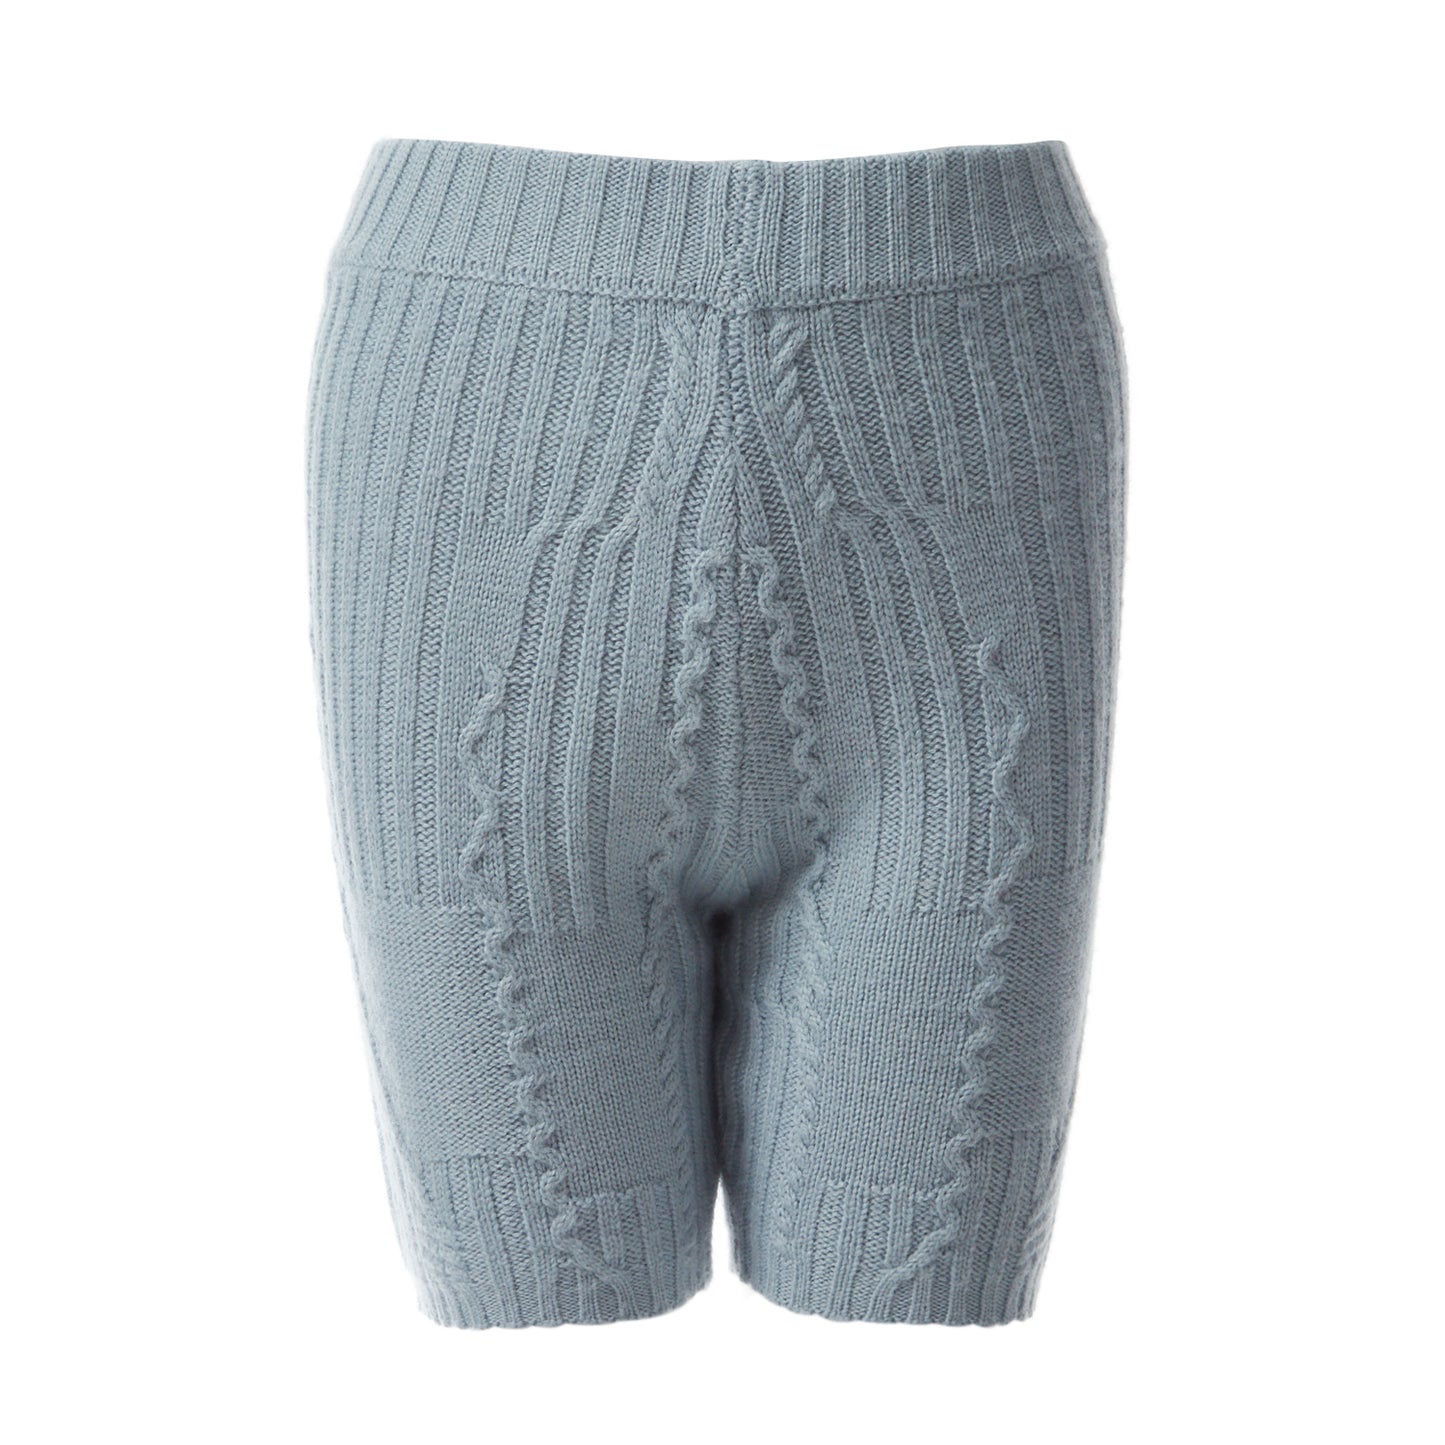 Fully Fashioning Fern Cable Knit Shorts